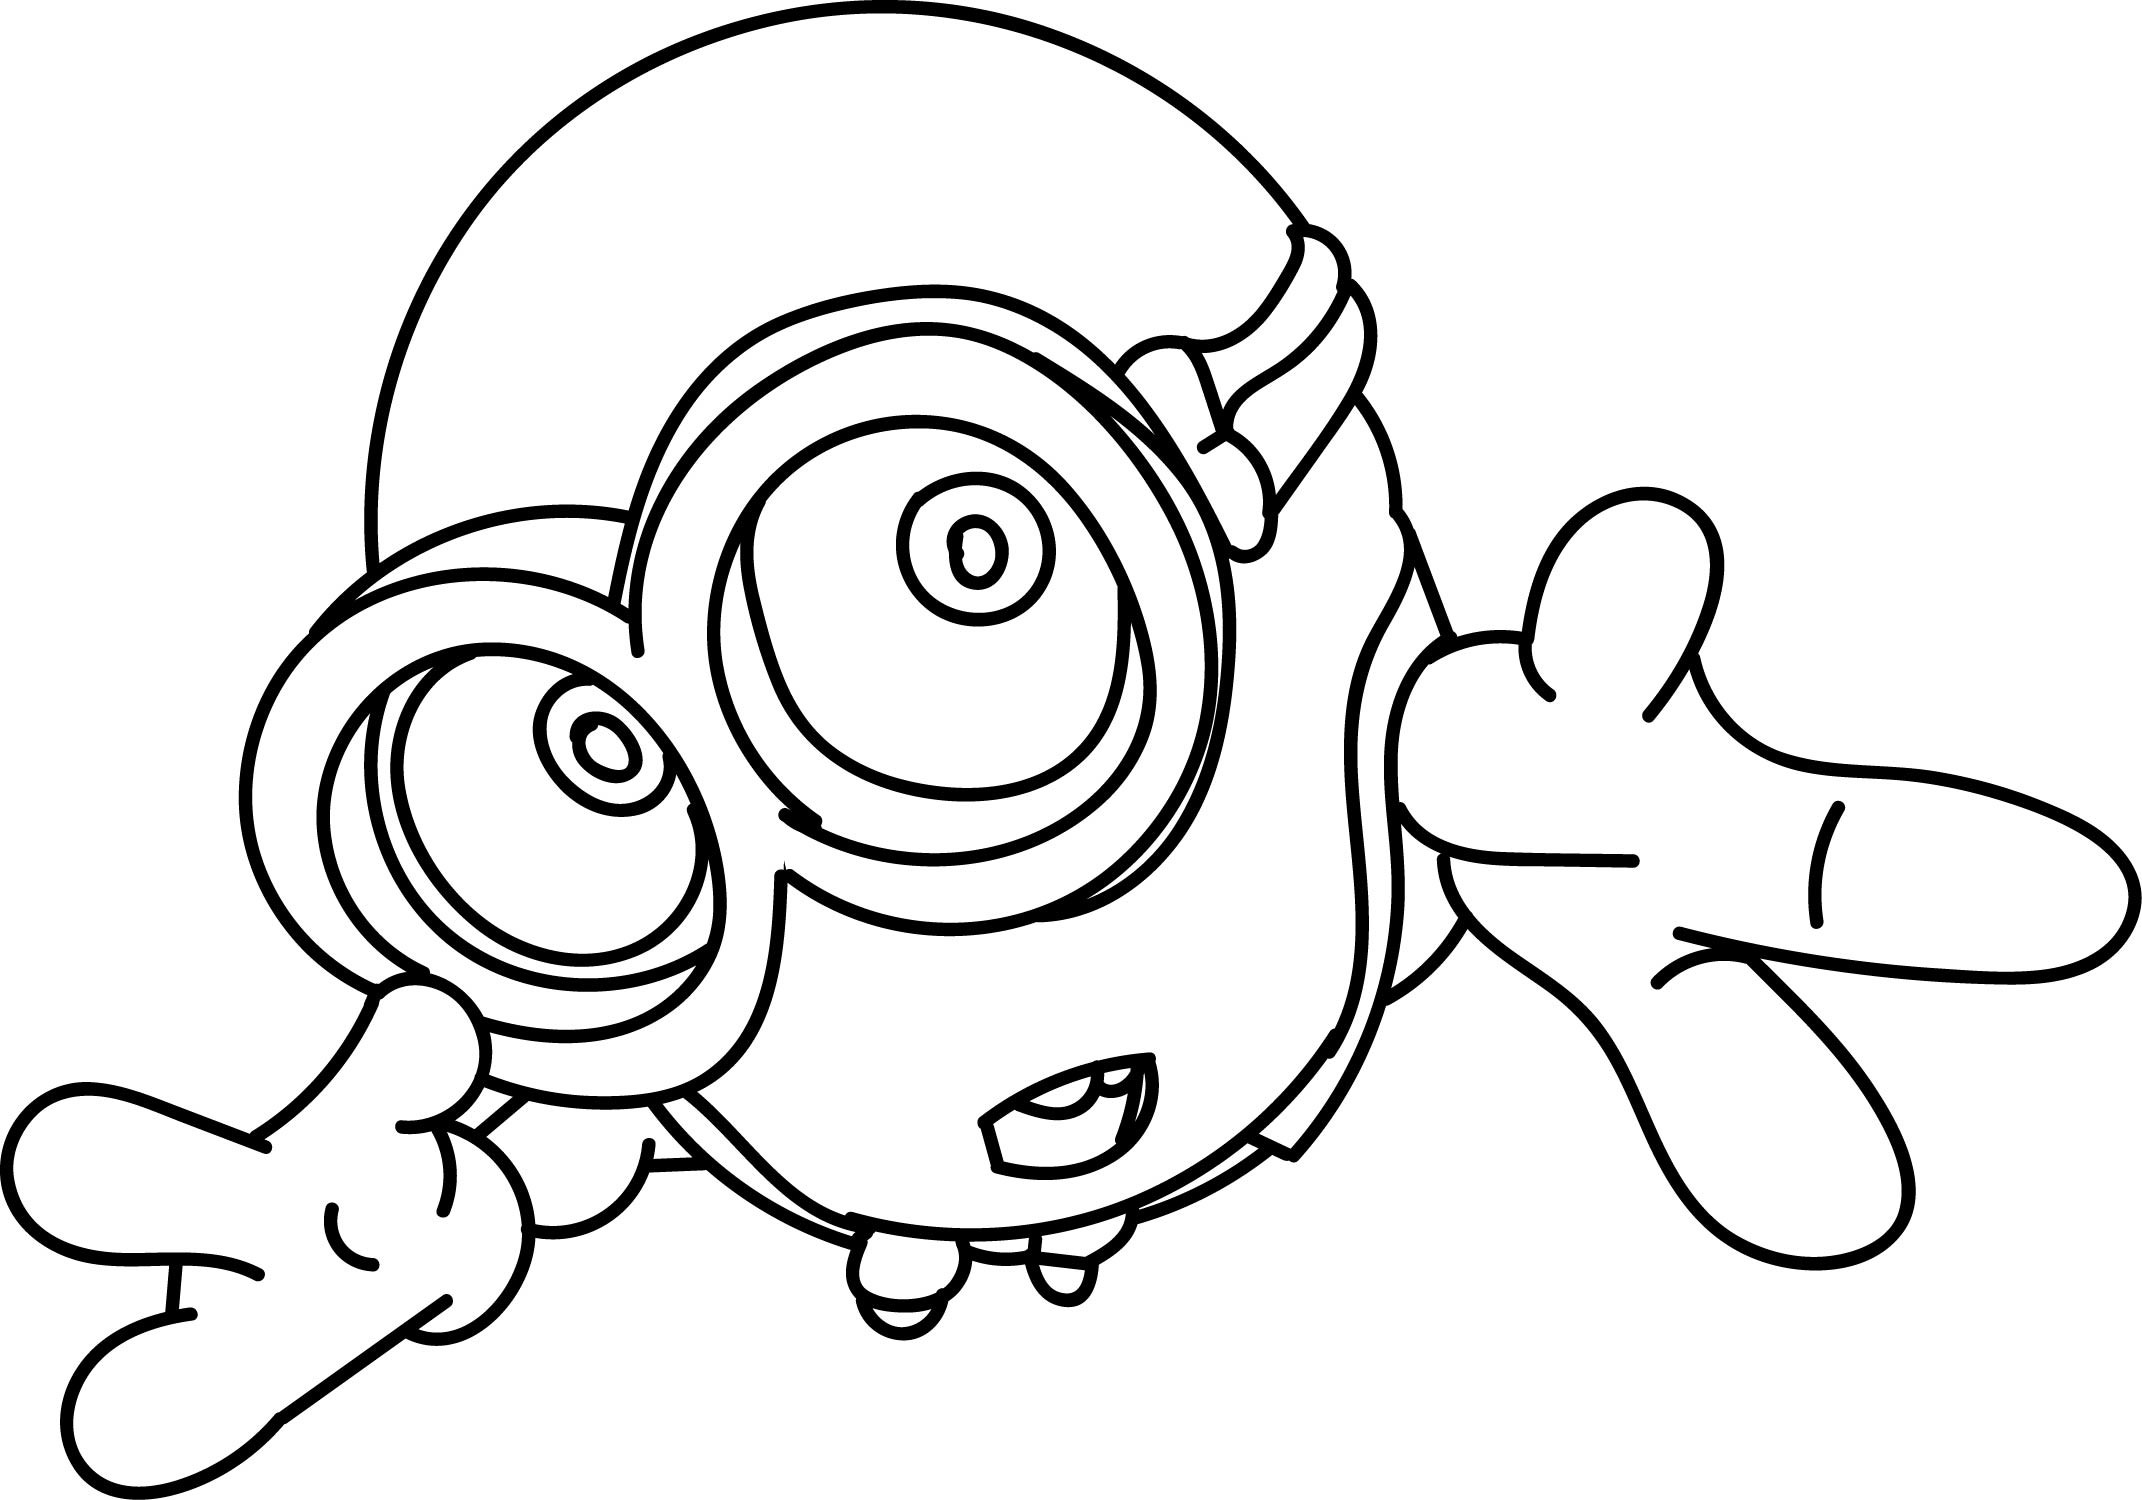 2142x1500 Cute Minion Wallpapers Coloring Page